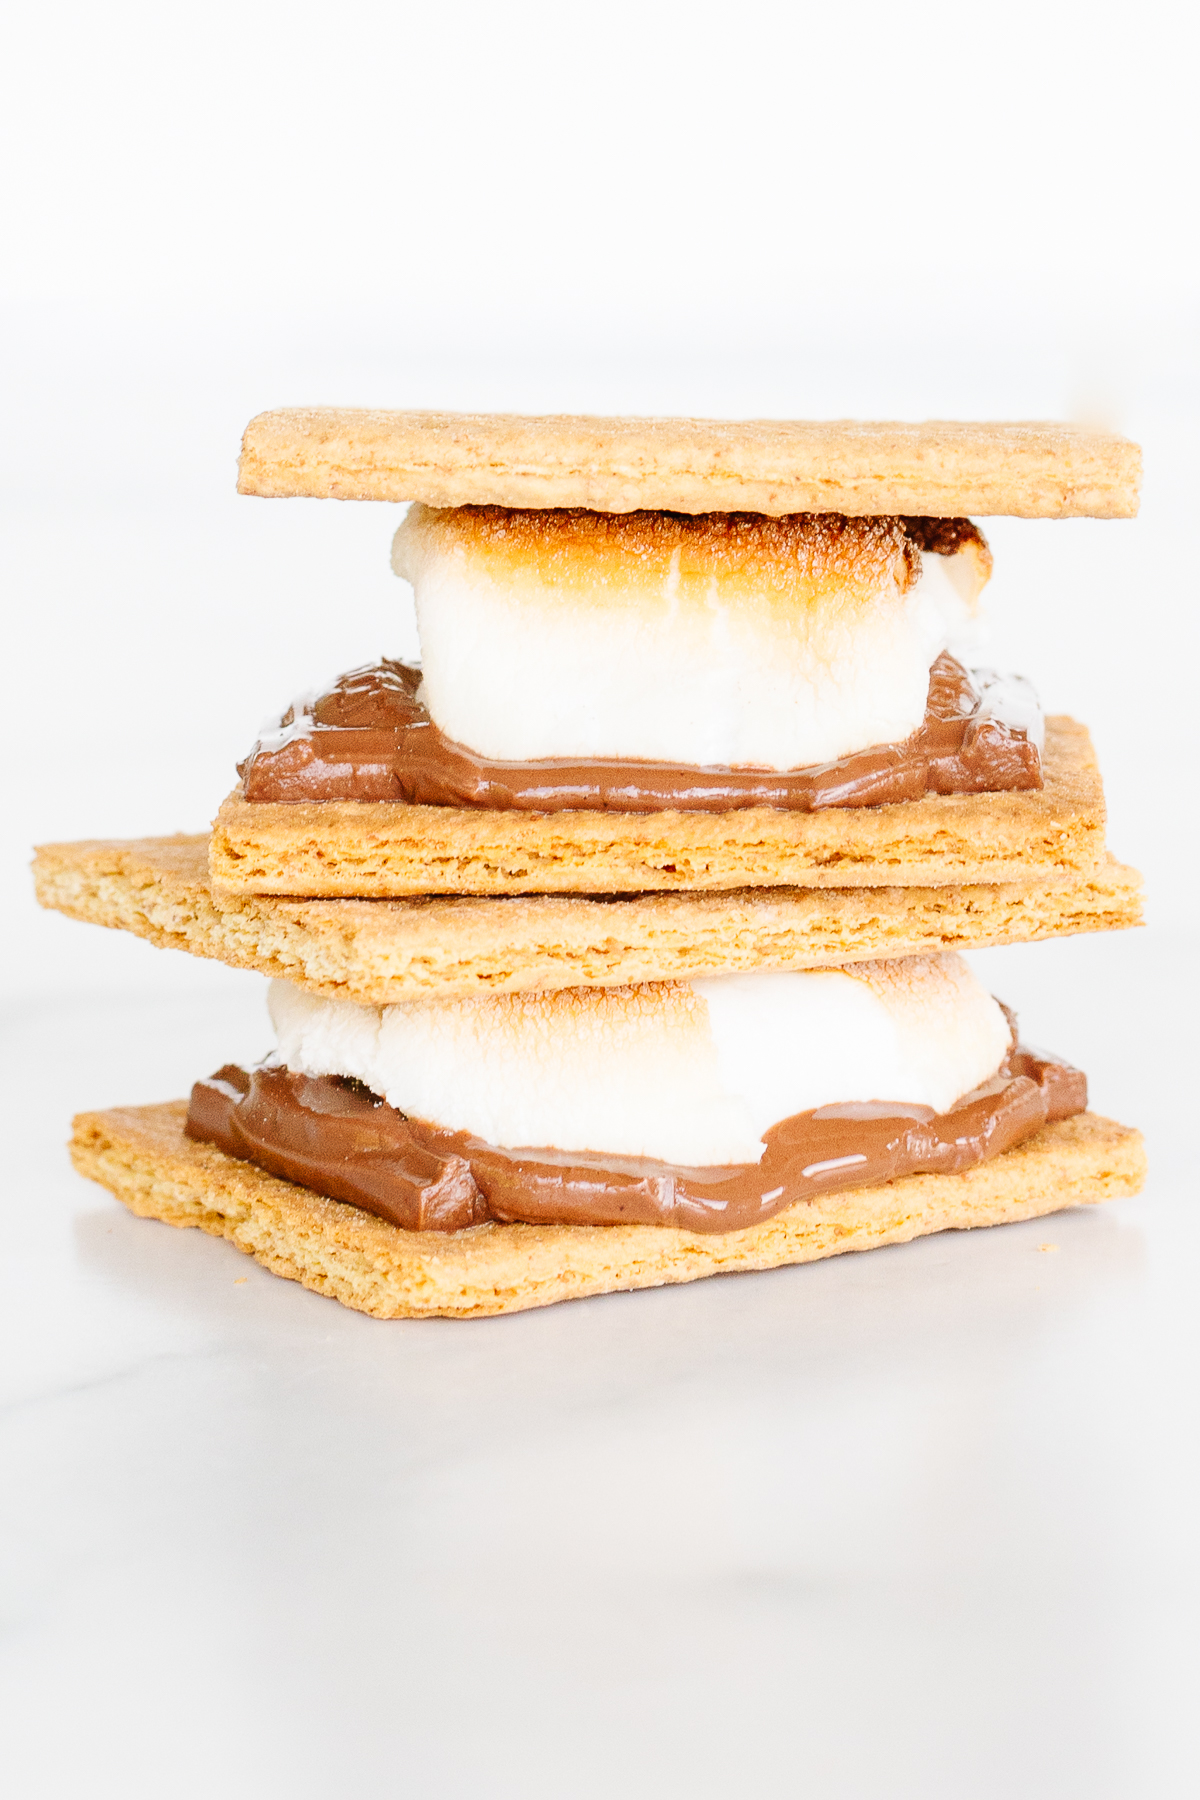 Three s'mores stacked on top of each other, toasted in the oven.